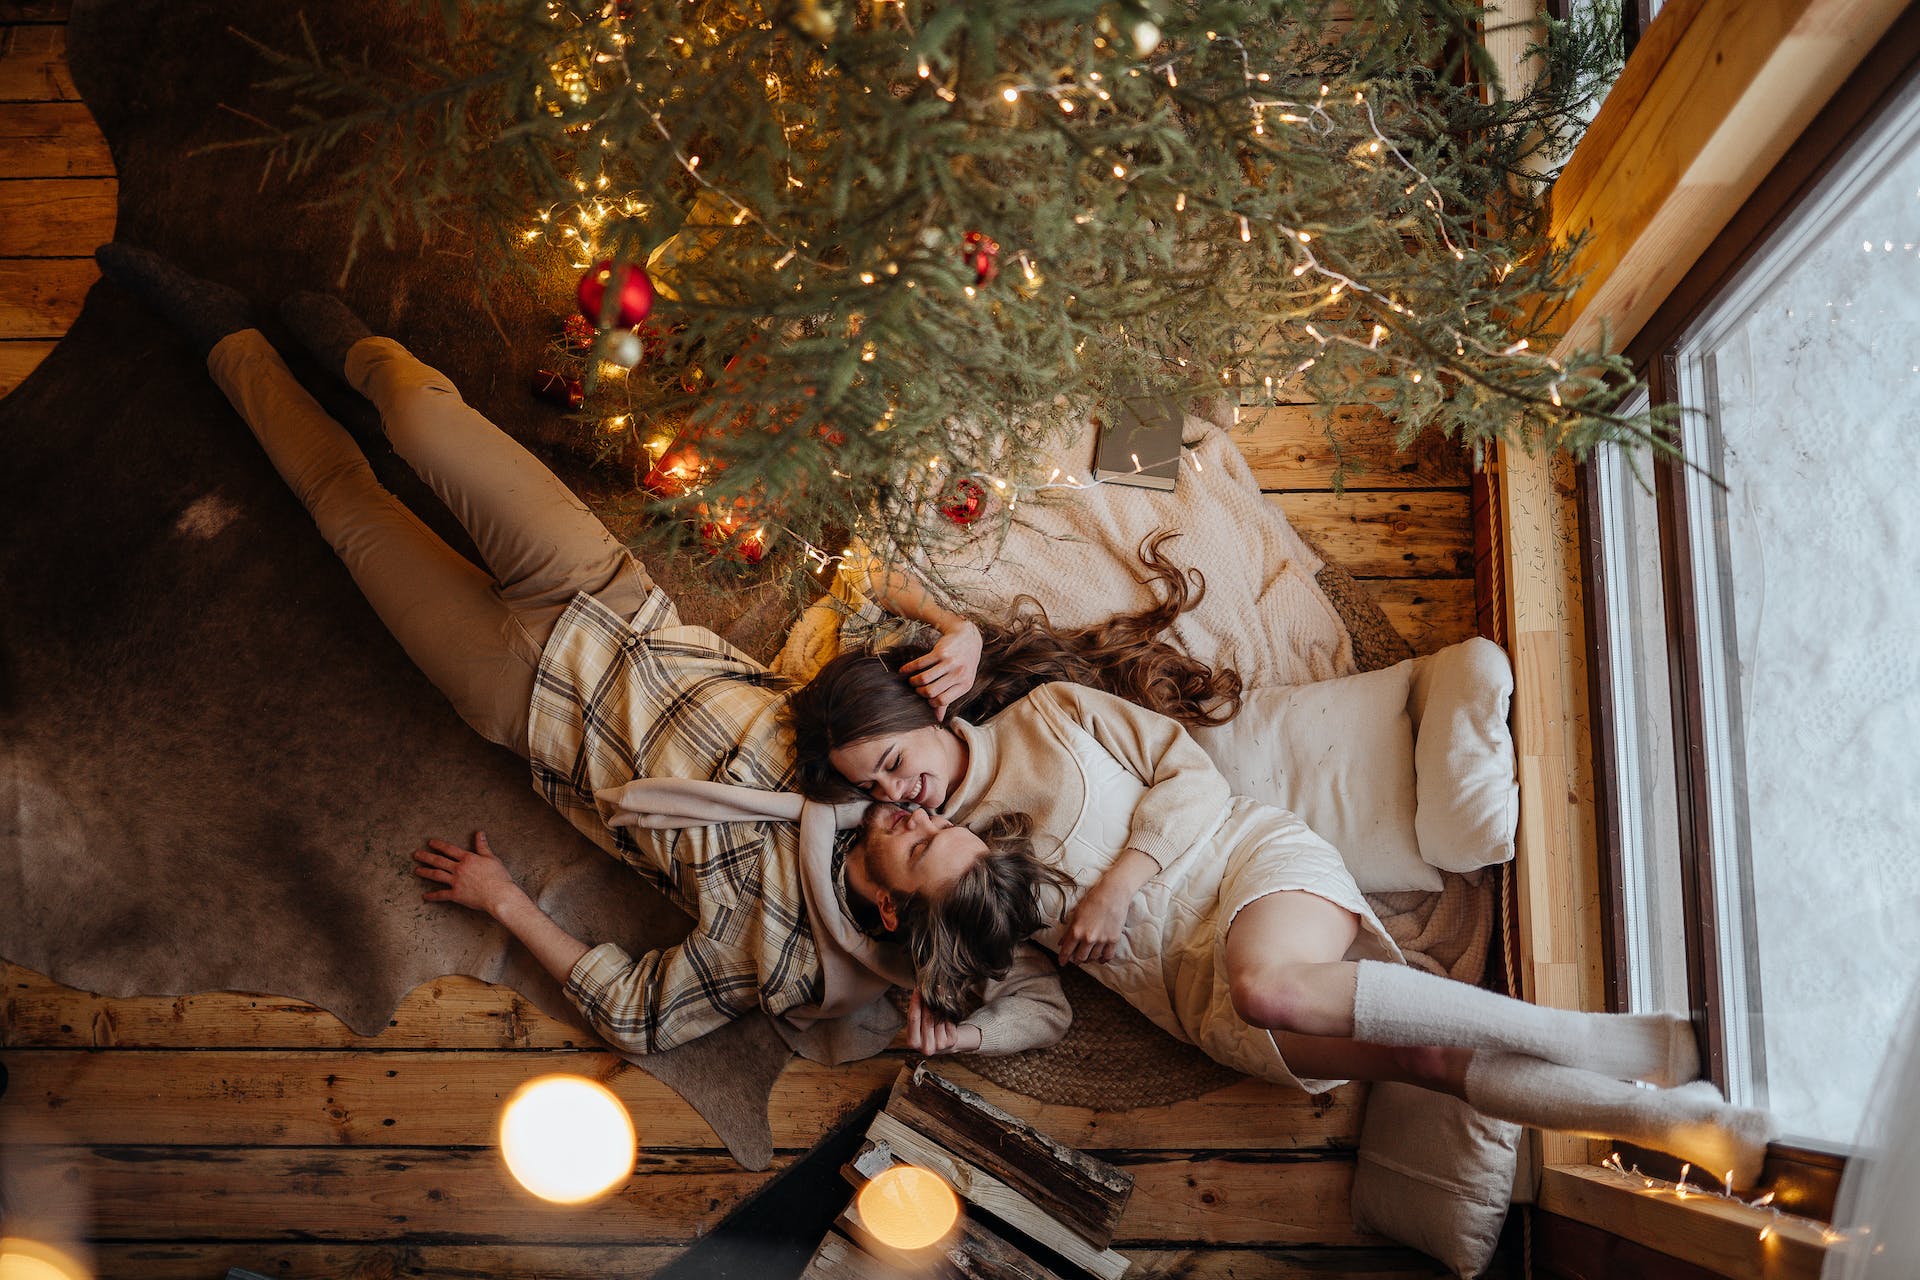 A couple lying next to a Christmas tree | Source: Pexels